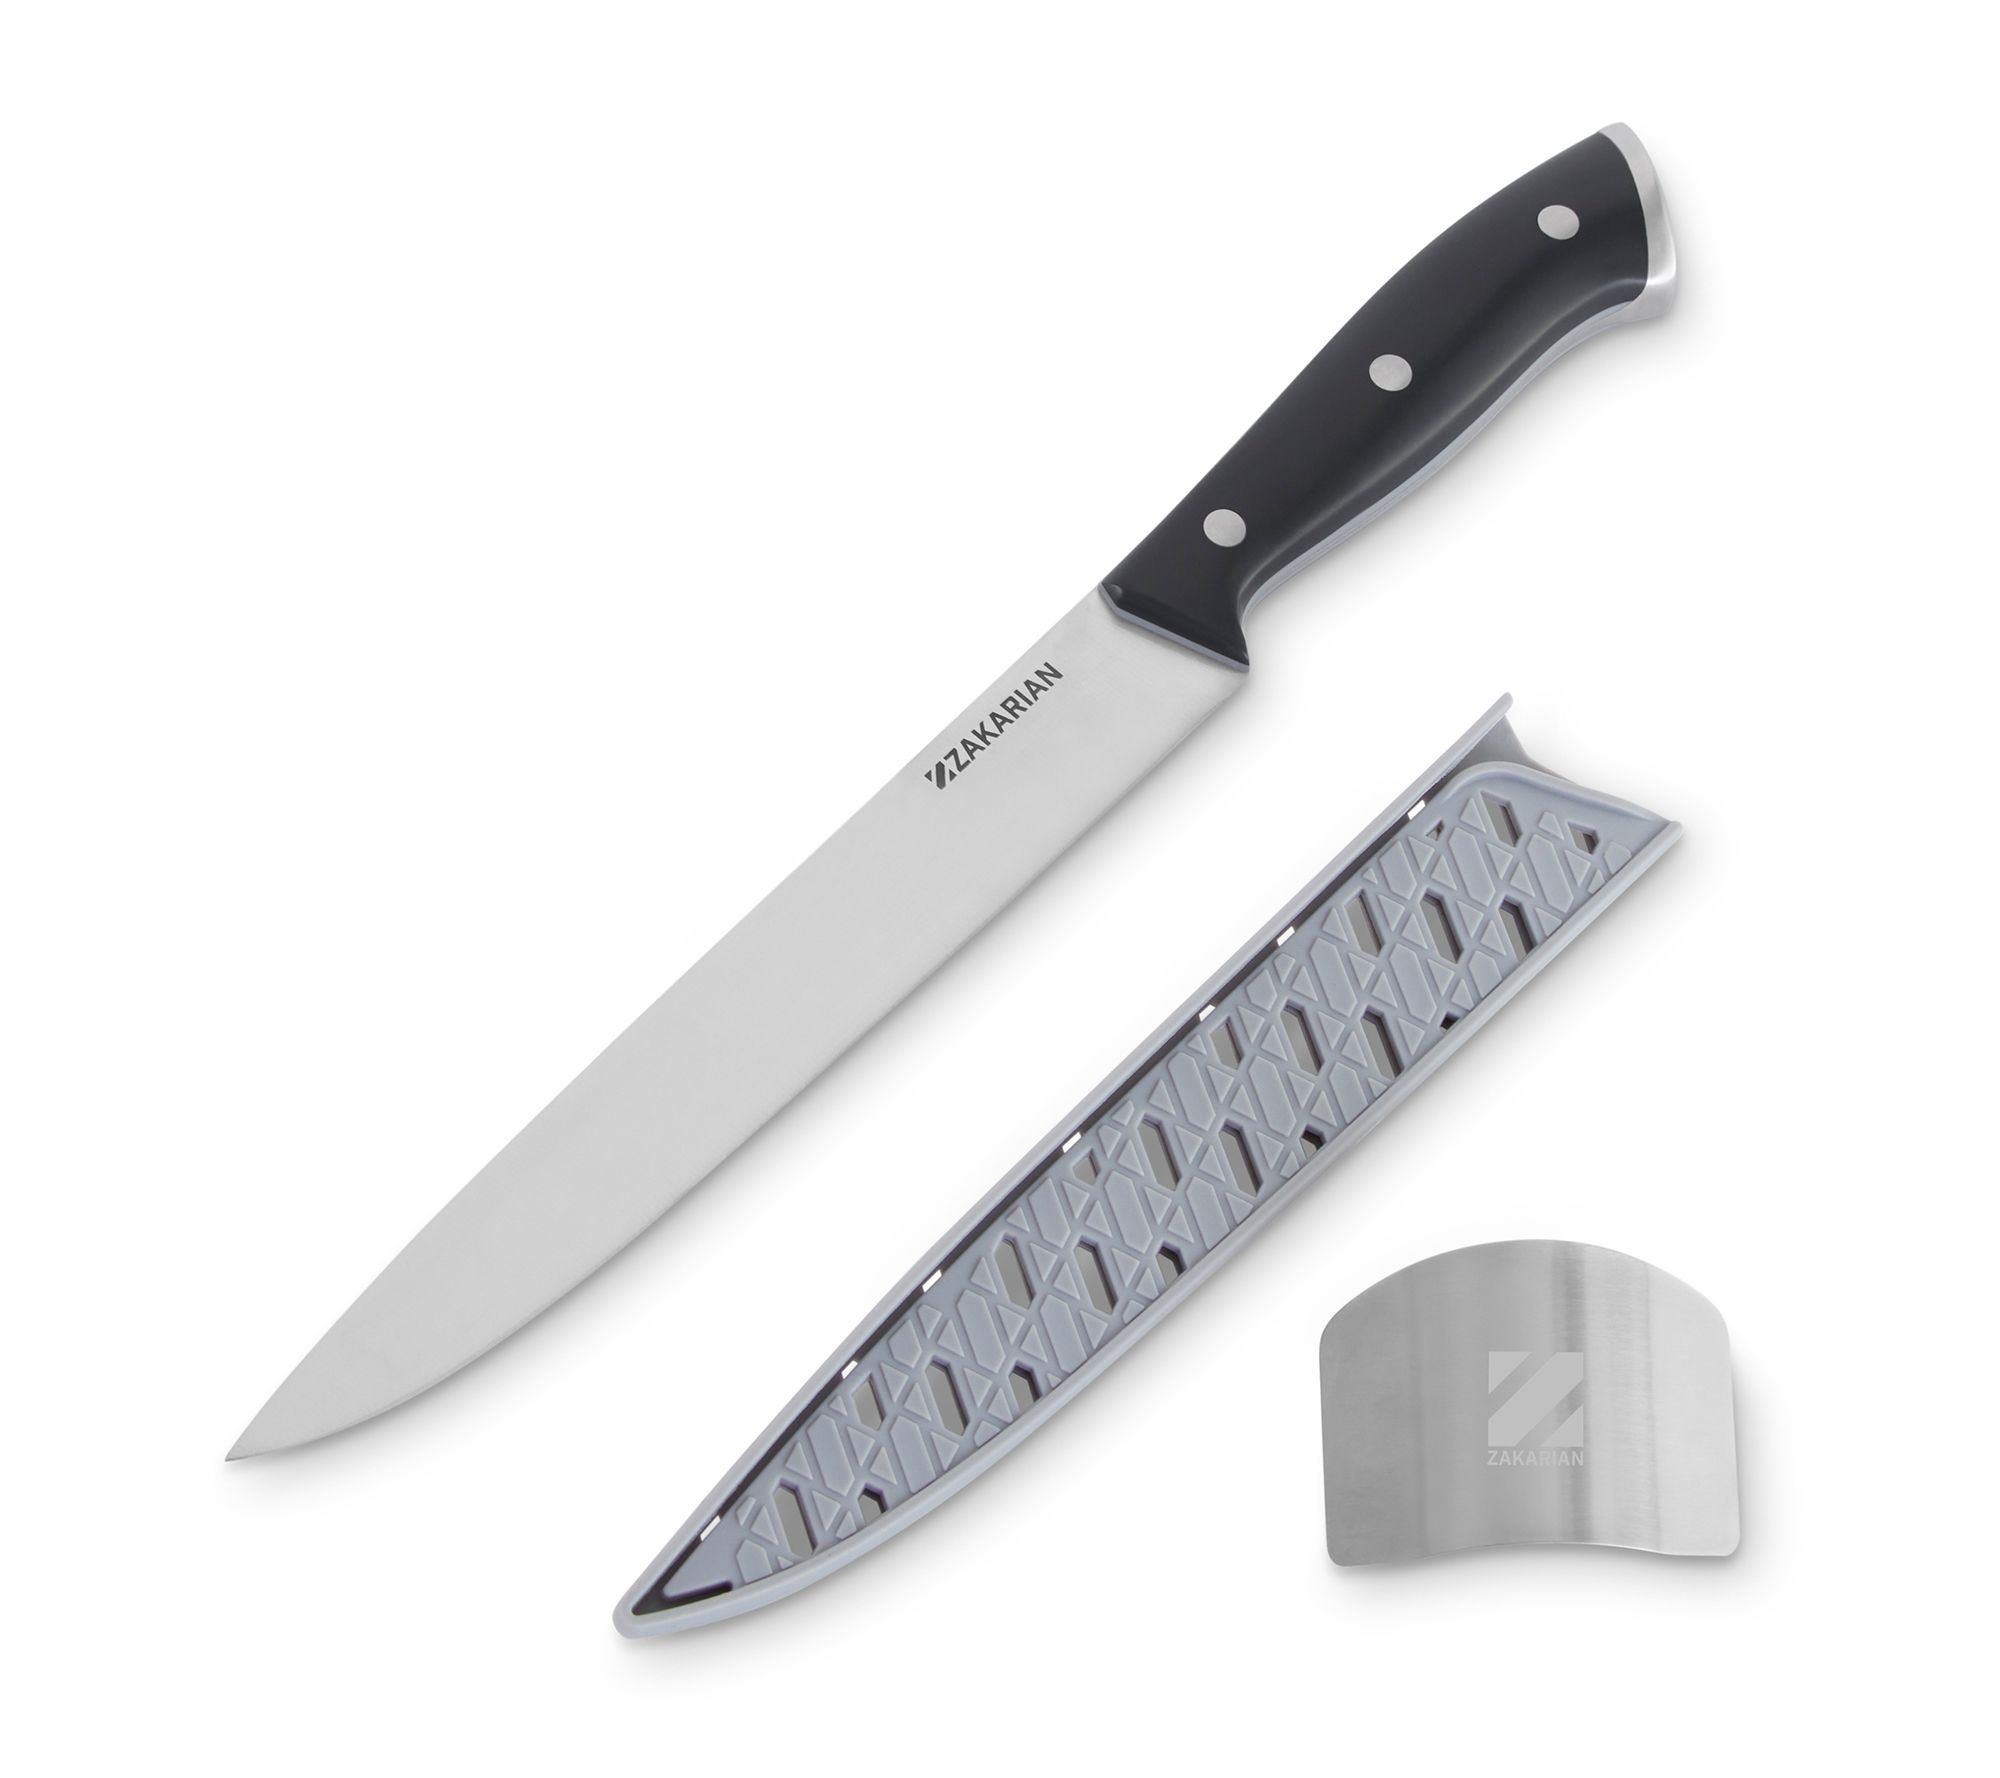 Kitchen knife protectors - the best prices